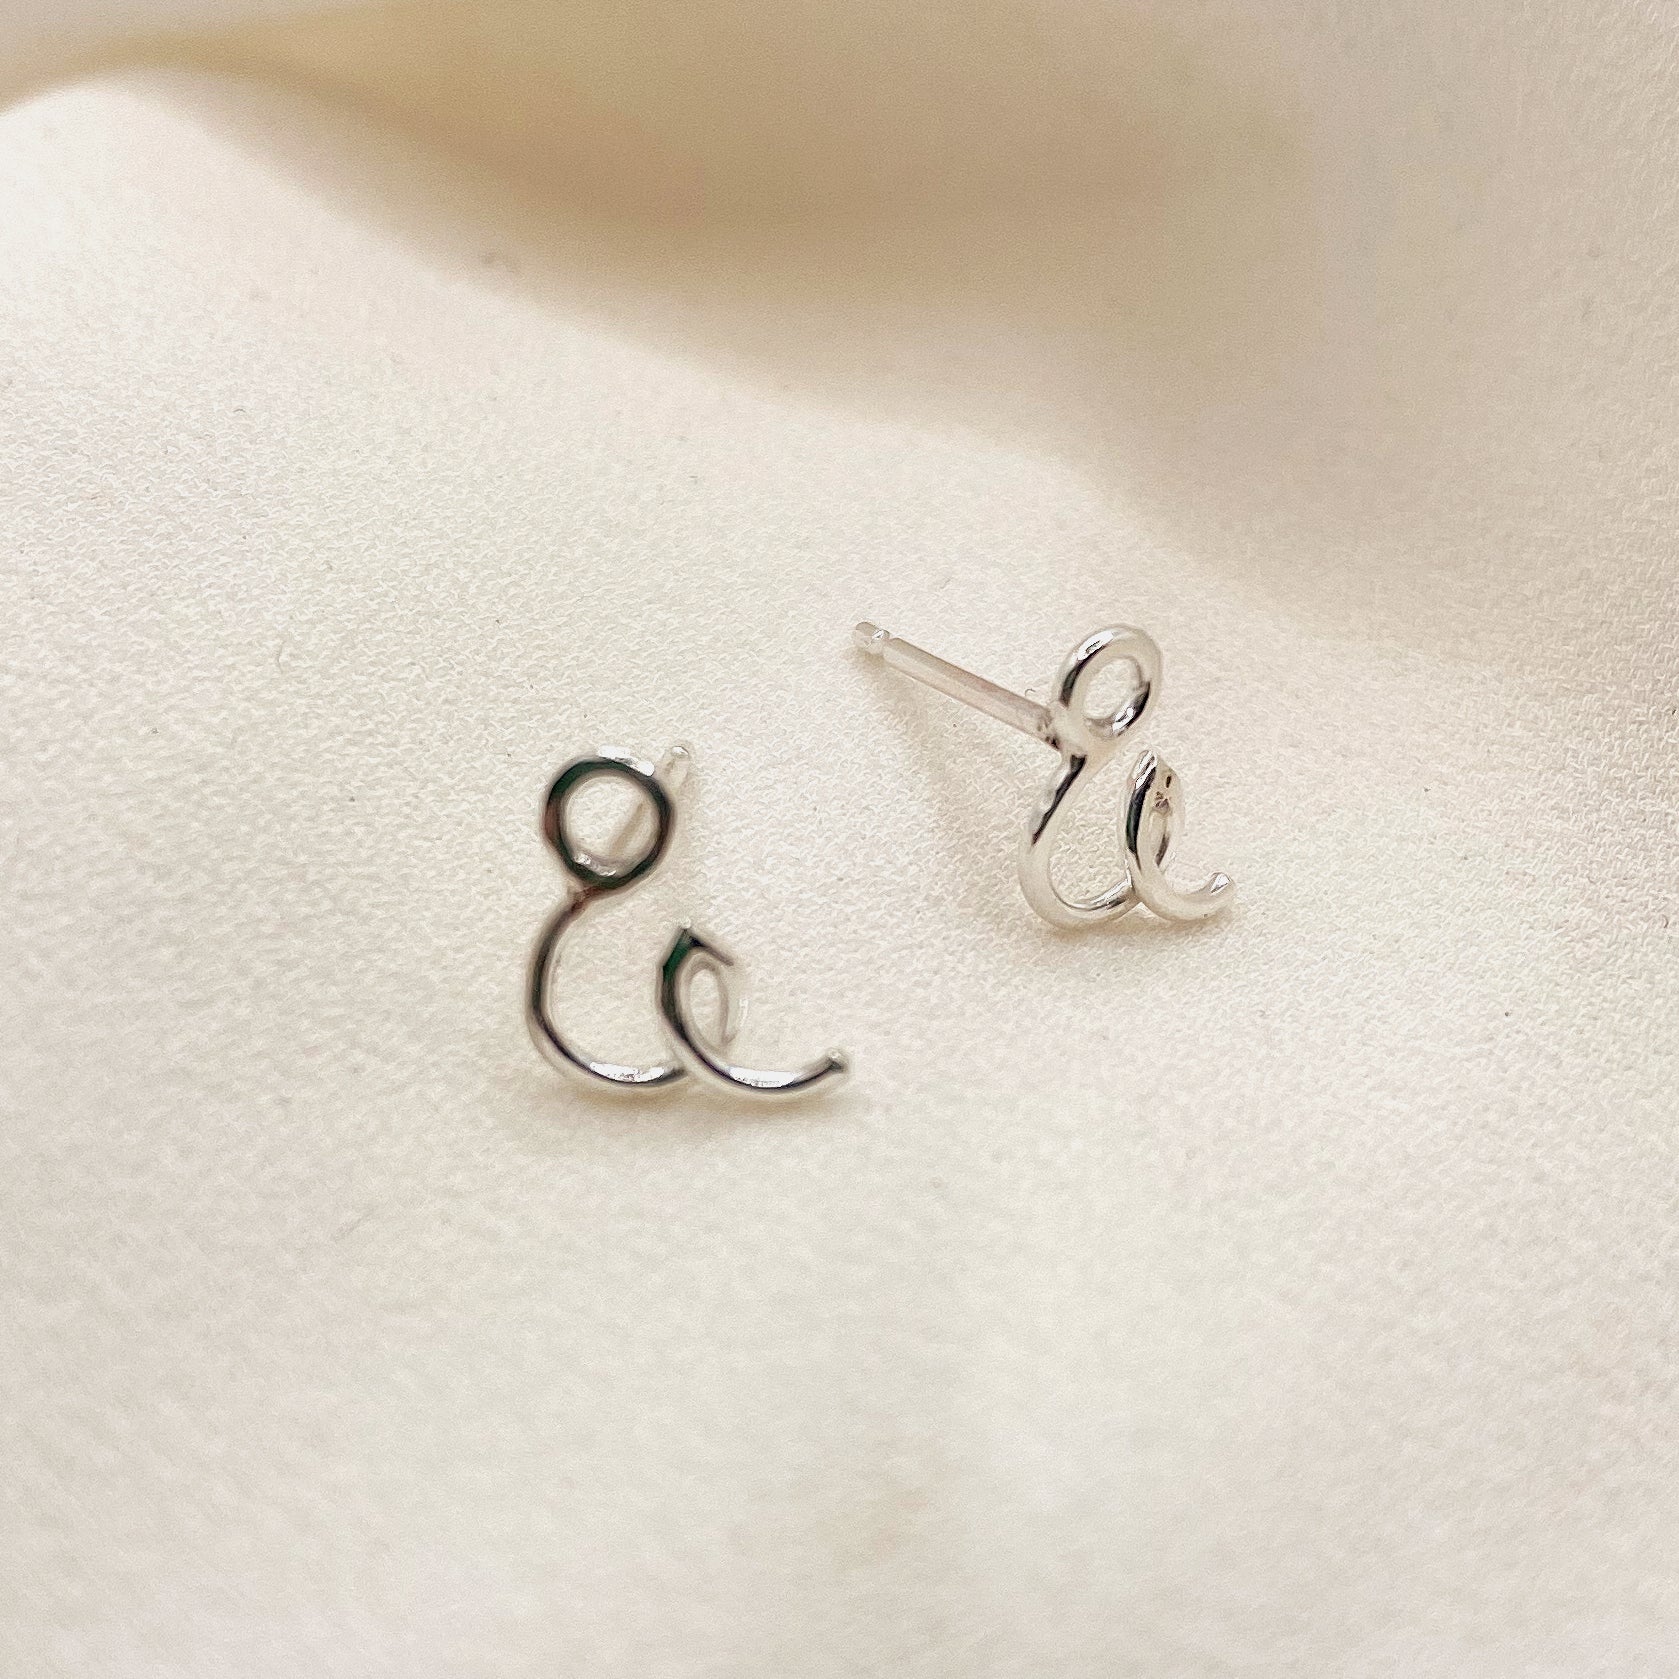 The And You stud earrings